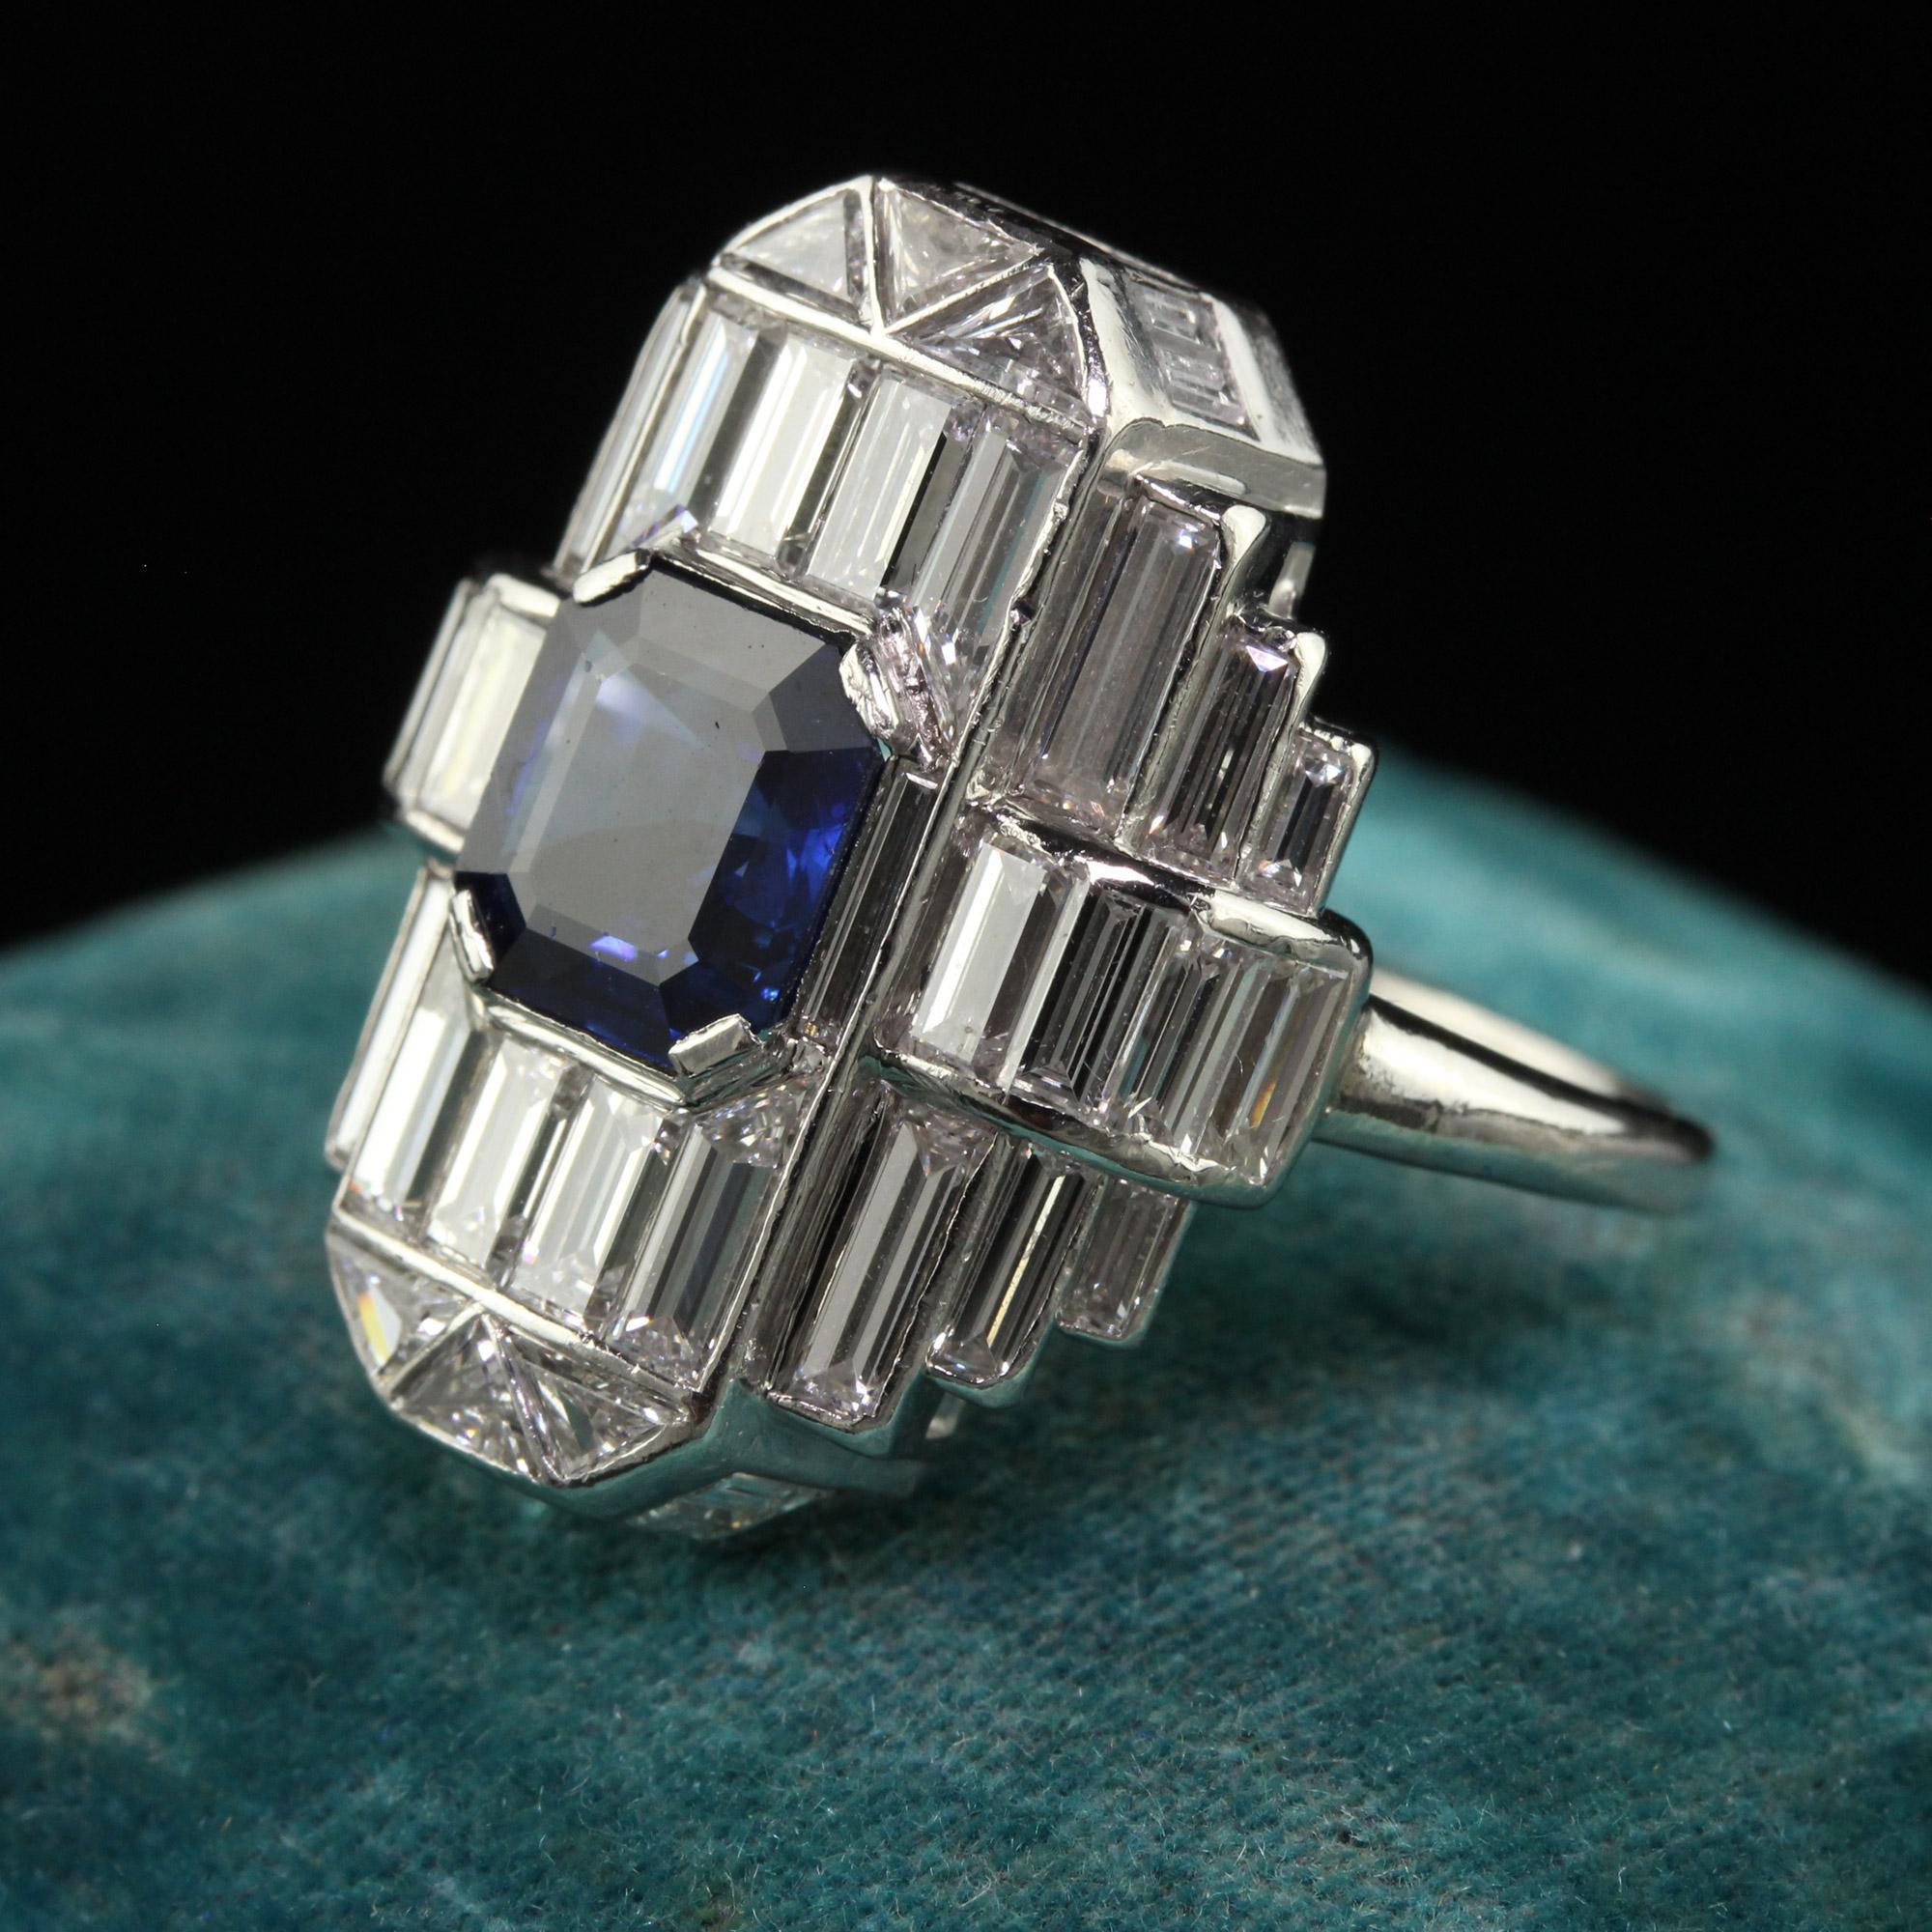 Vintage Art Deco Platinum Baguette Diamond and Sapphire Cocktail Ring - GIA In Good Condition For Sale In Great Neck, NY